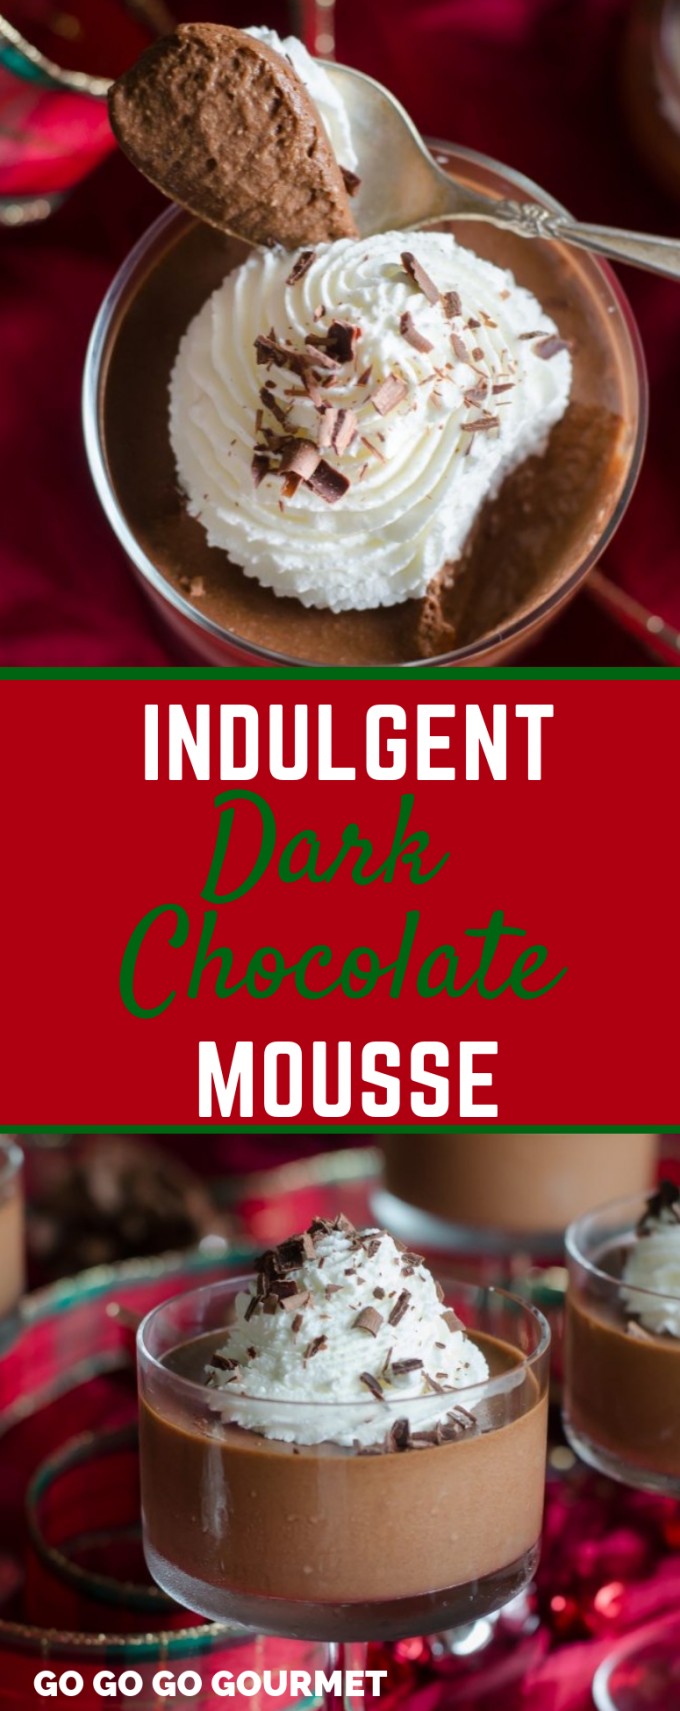 This easy Dark Chocolate Mousse recipe is the best for the holidays! You can serve it in festive cups for an elegant dessert that all of your guests will love! You could turn it into a pie, or even use it as a filling for a cake! The possibilities are endless. #GoGoGoGourmet #DarkChocolateMousse #EasyDessertRecipes #ChristmasDessertRecipes via @gogogogourmet